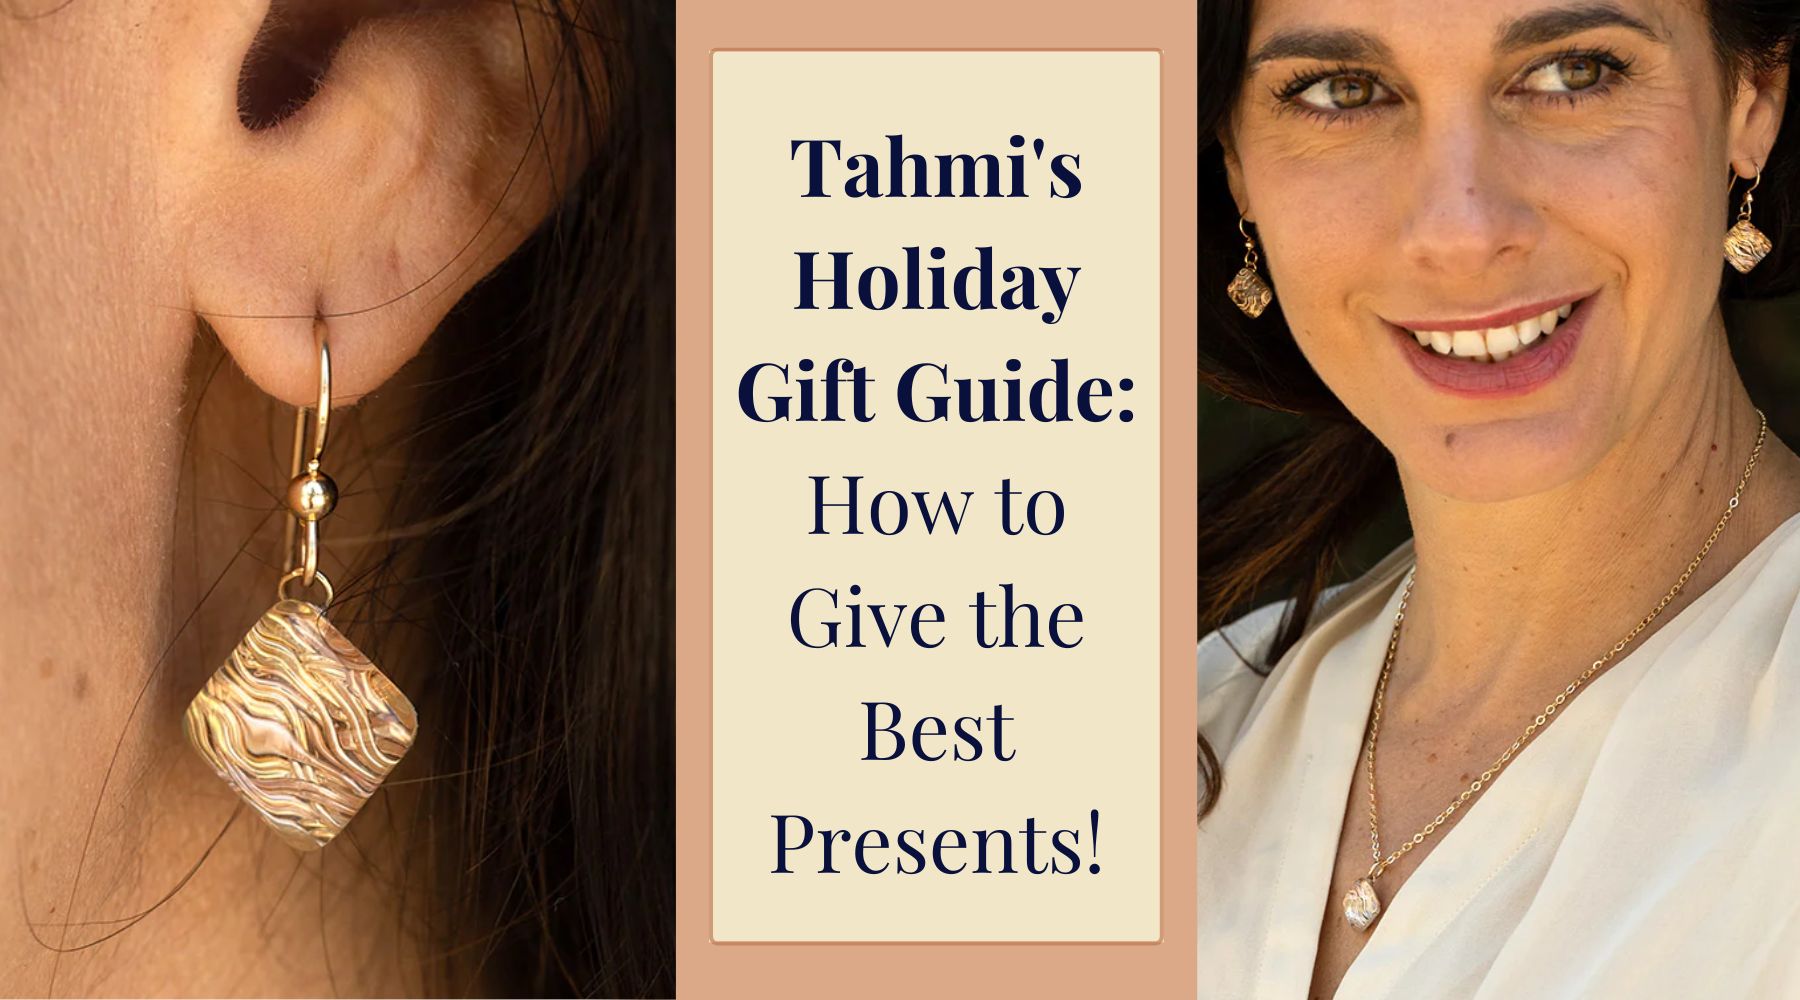 Tahmi's Holiday Gift Guide: How to Give the Best Presents!